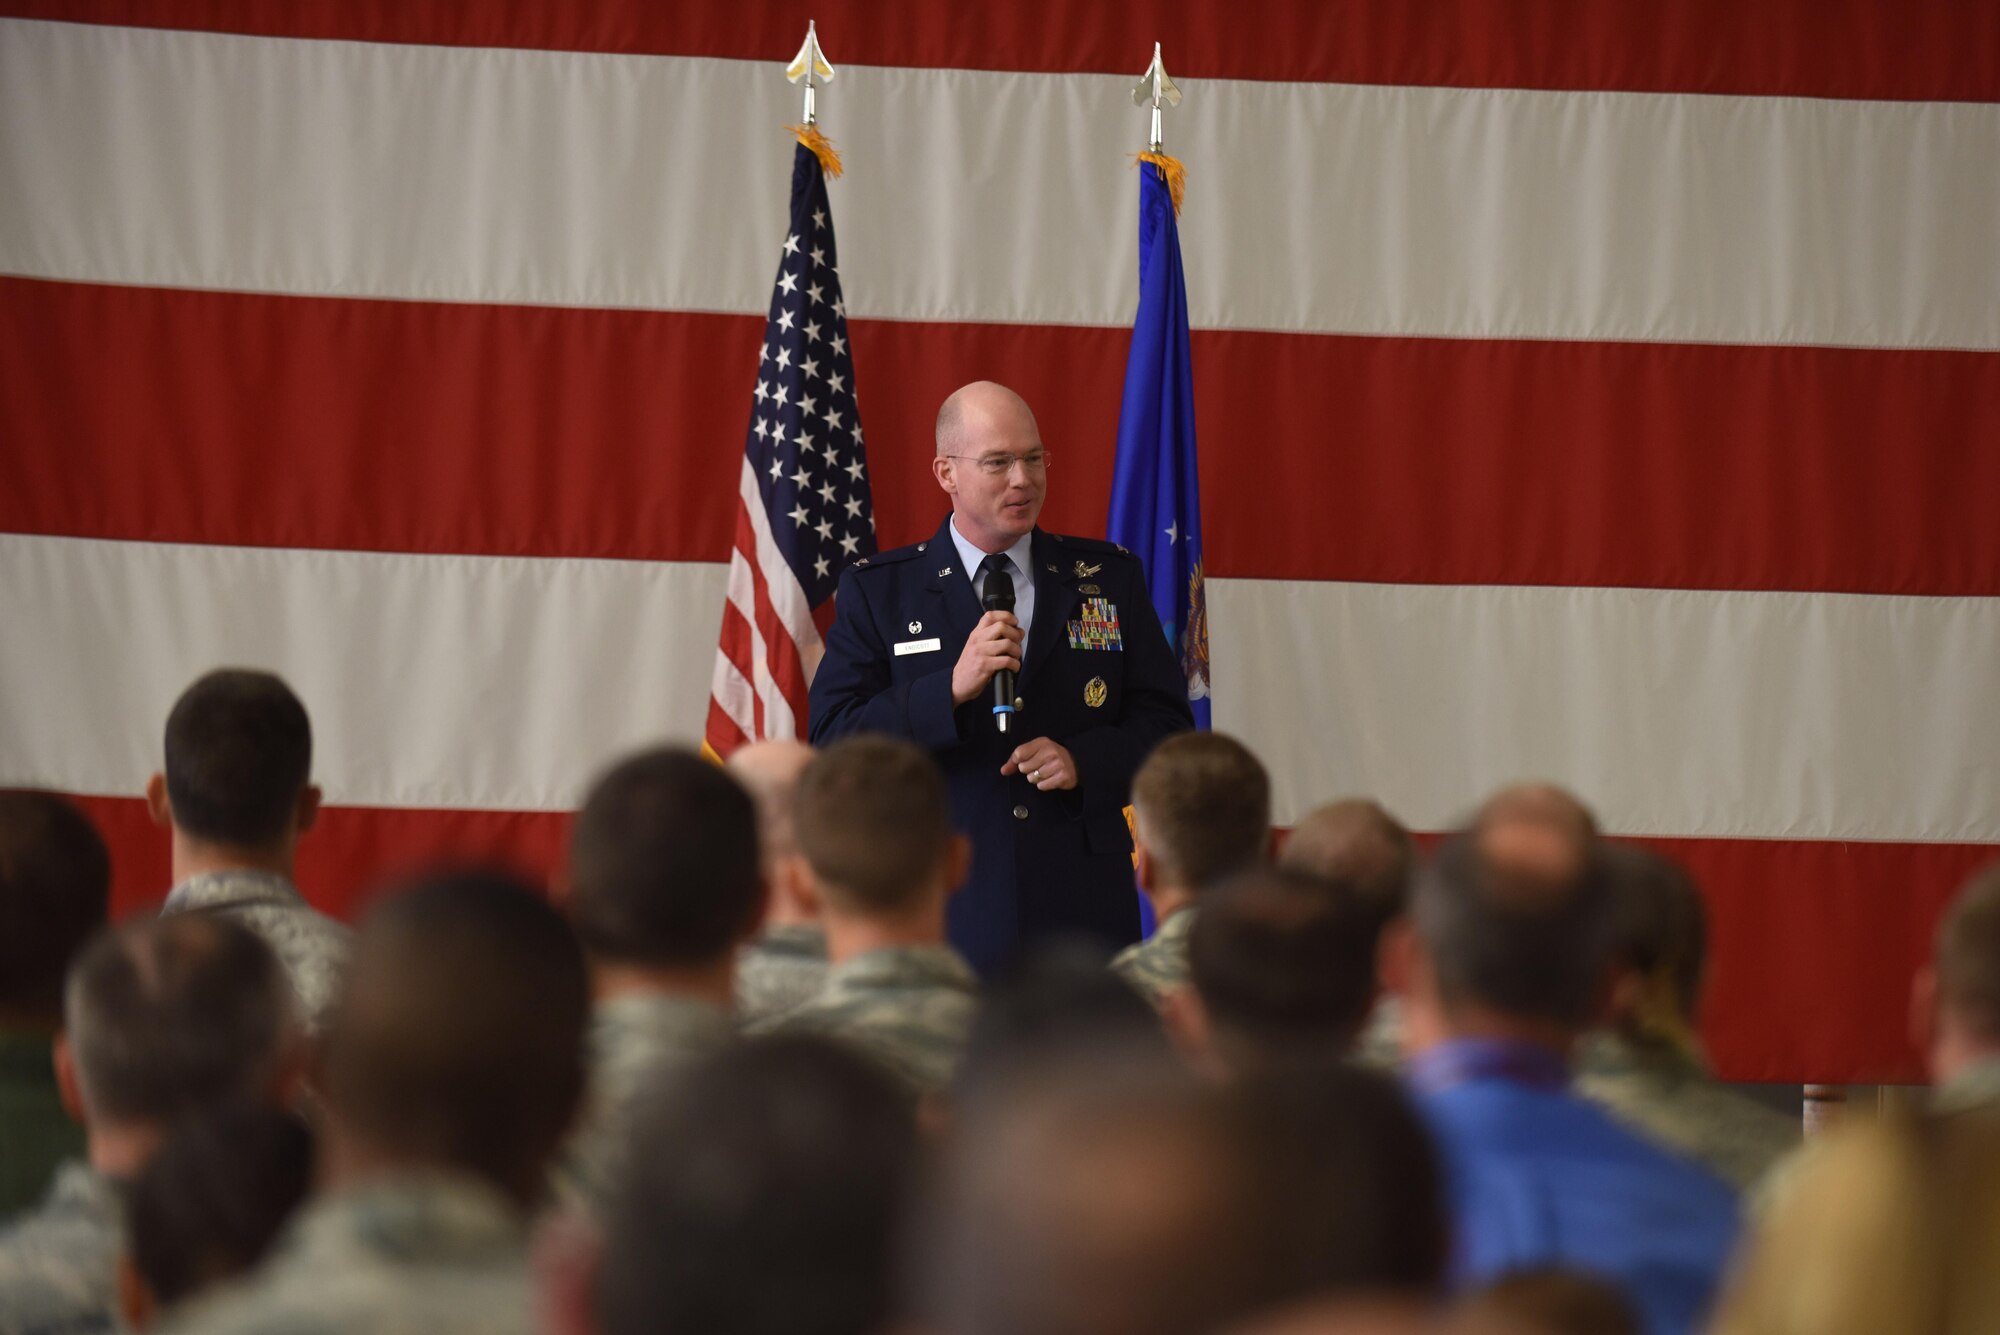 Col. Troy Endicott, 21st Operations Group commander, addresses members in attendance during an assumption of command ceremony, July 22, 2016, Vandenberg Air Force Base, Calif. Lt. Col. Scott Putnam, 18th Space Control Squadron commander, assumed command of the 18th SPCS, the newest space surveillance unit that will fall under the 21st Space Wing.